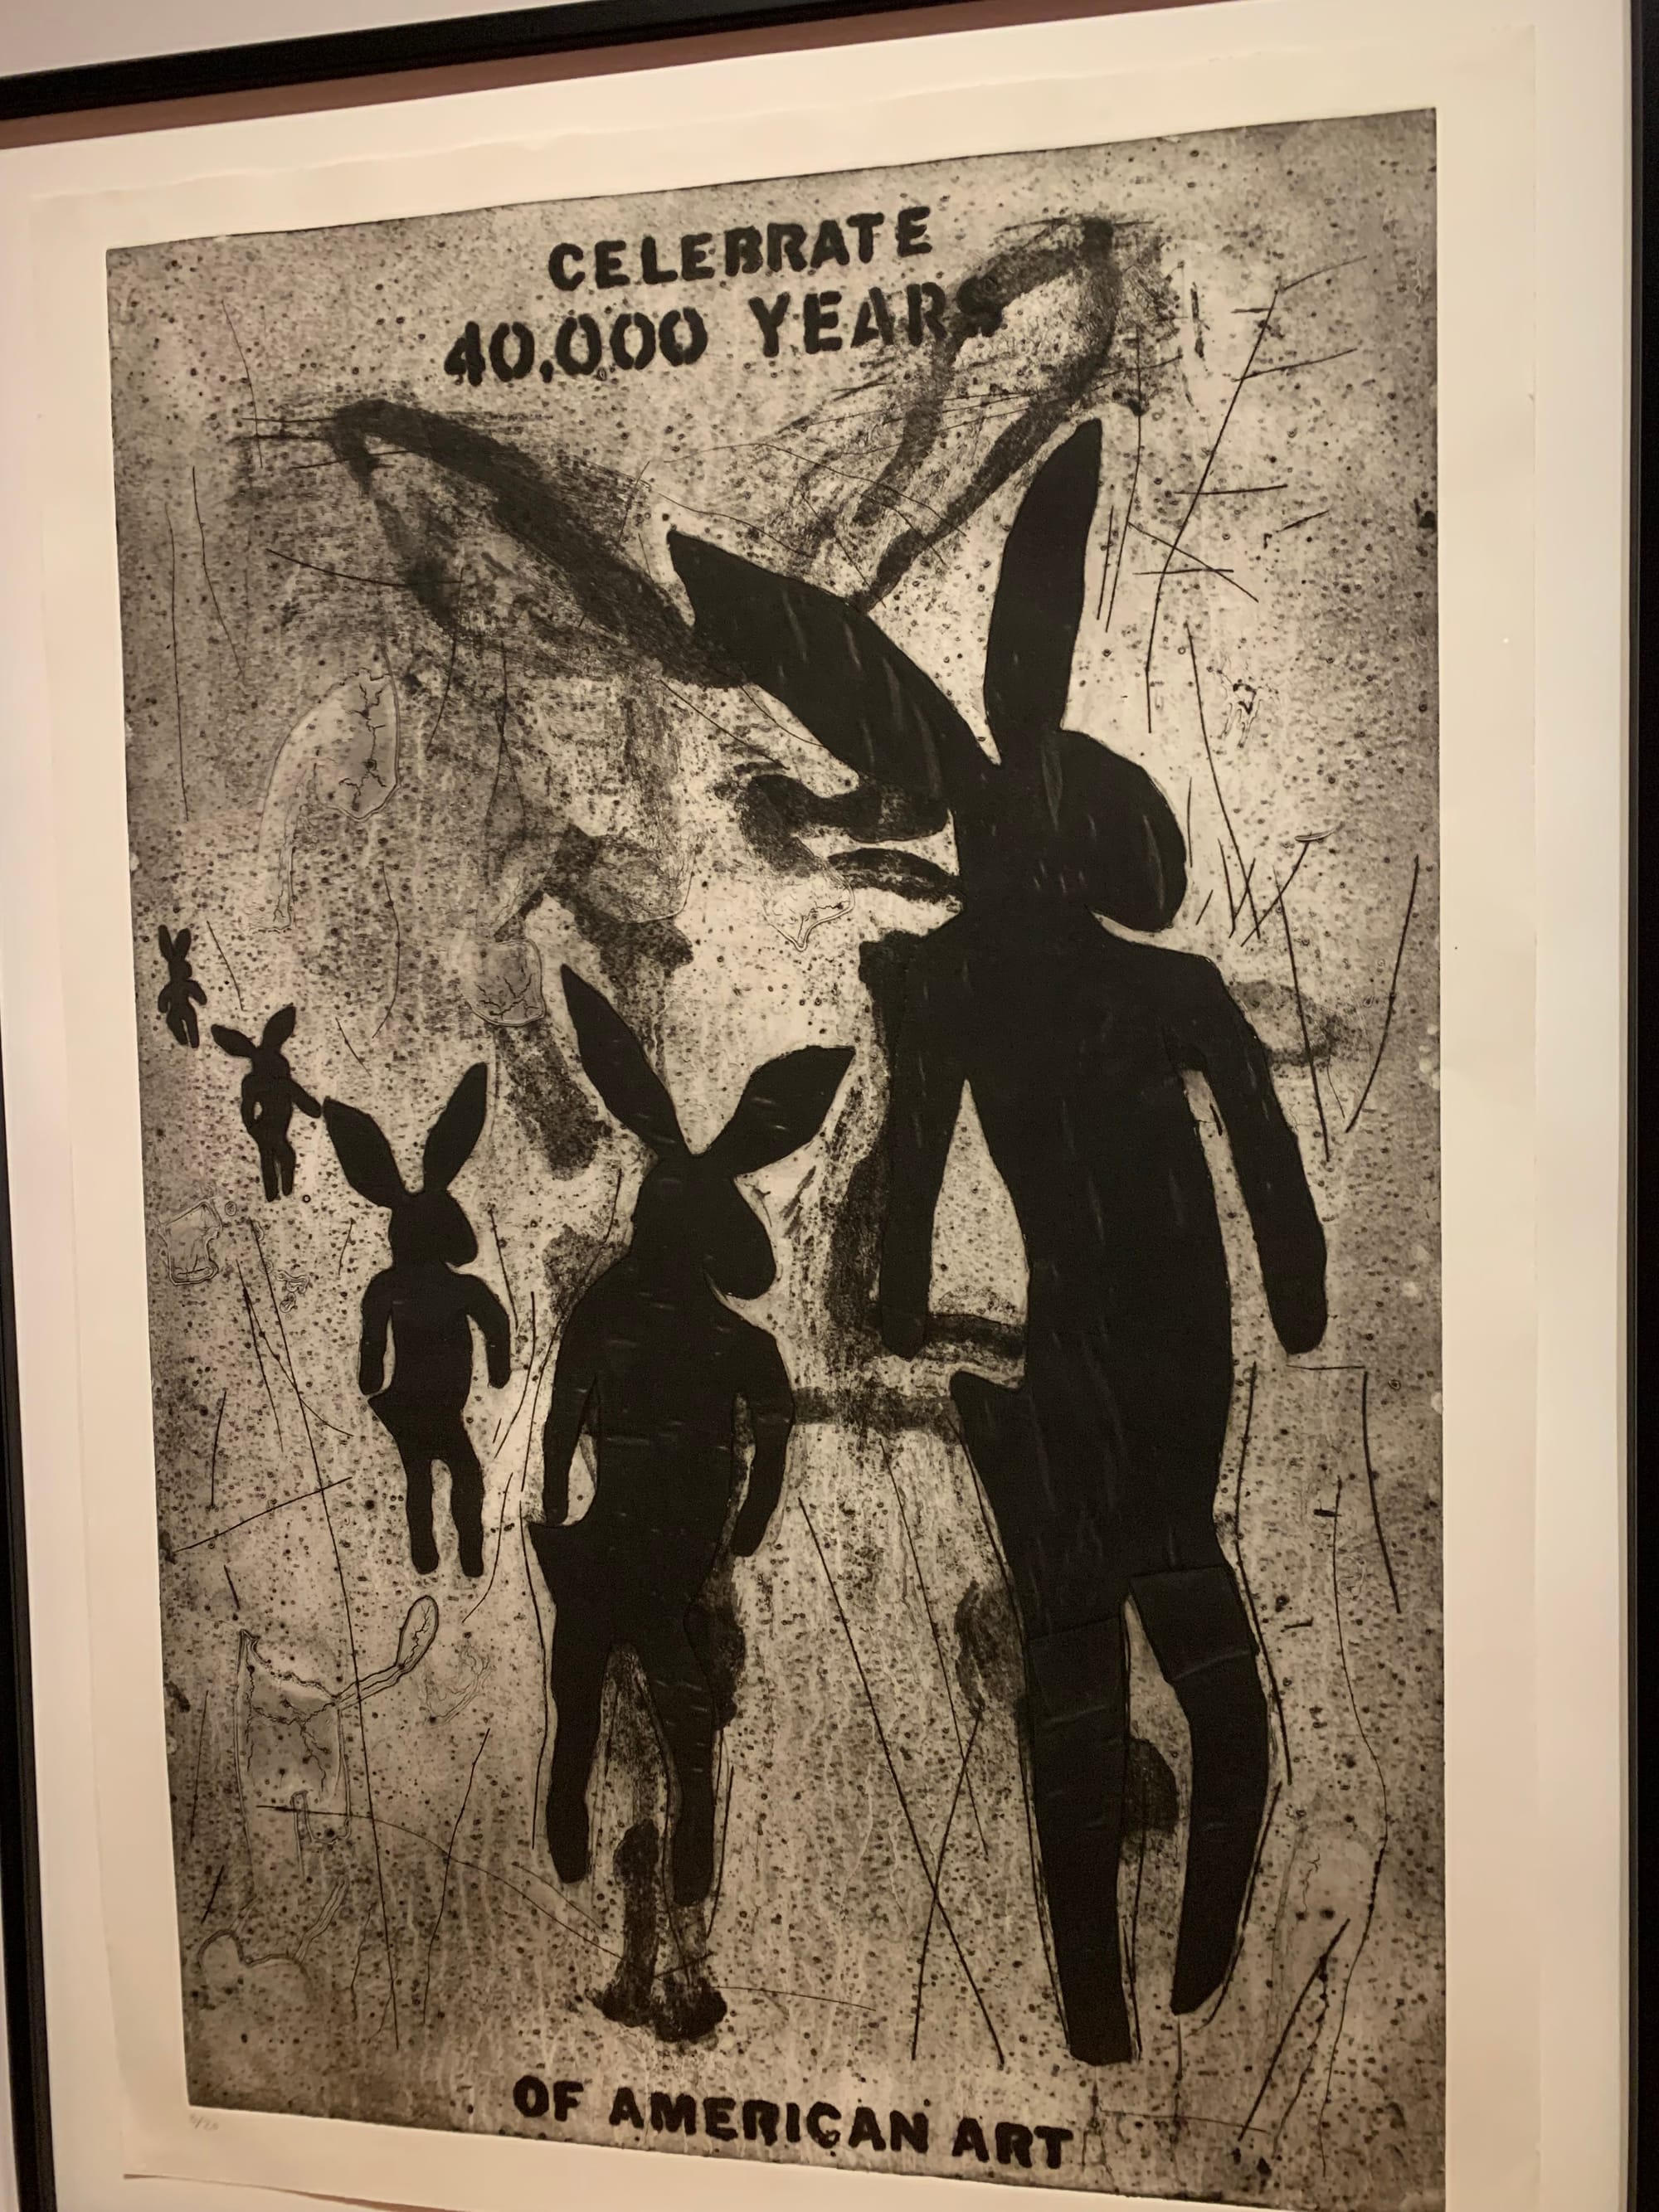 a slightly off kilter photo of Celebrate 40,000 Years of American Art, by Jaune Quick-to-See Smith: a large vertical collagraph etching showing the title & black figures of an upright rabbit